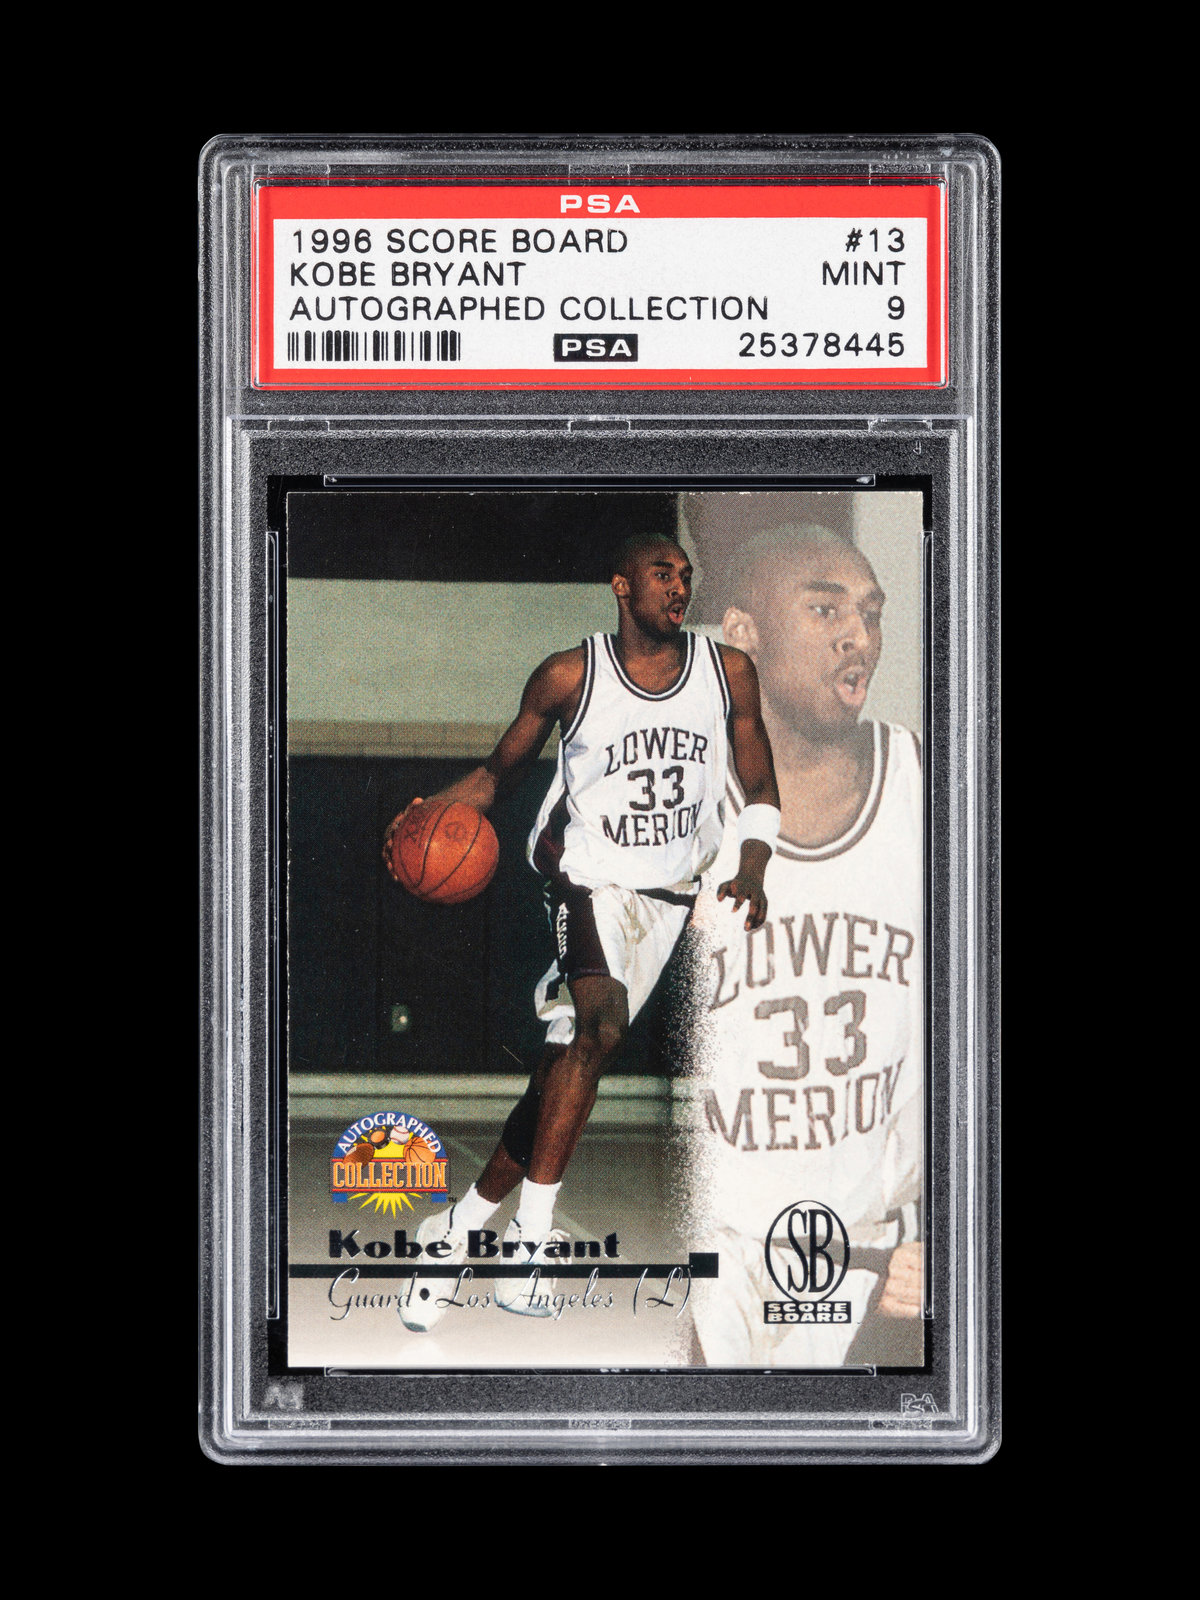 A Group of 1996-97 Score Board Kobe Bryant Rookie Basketball Cards,